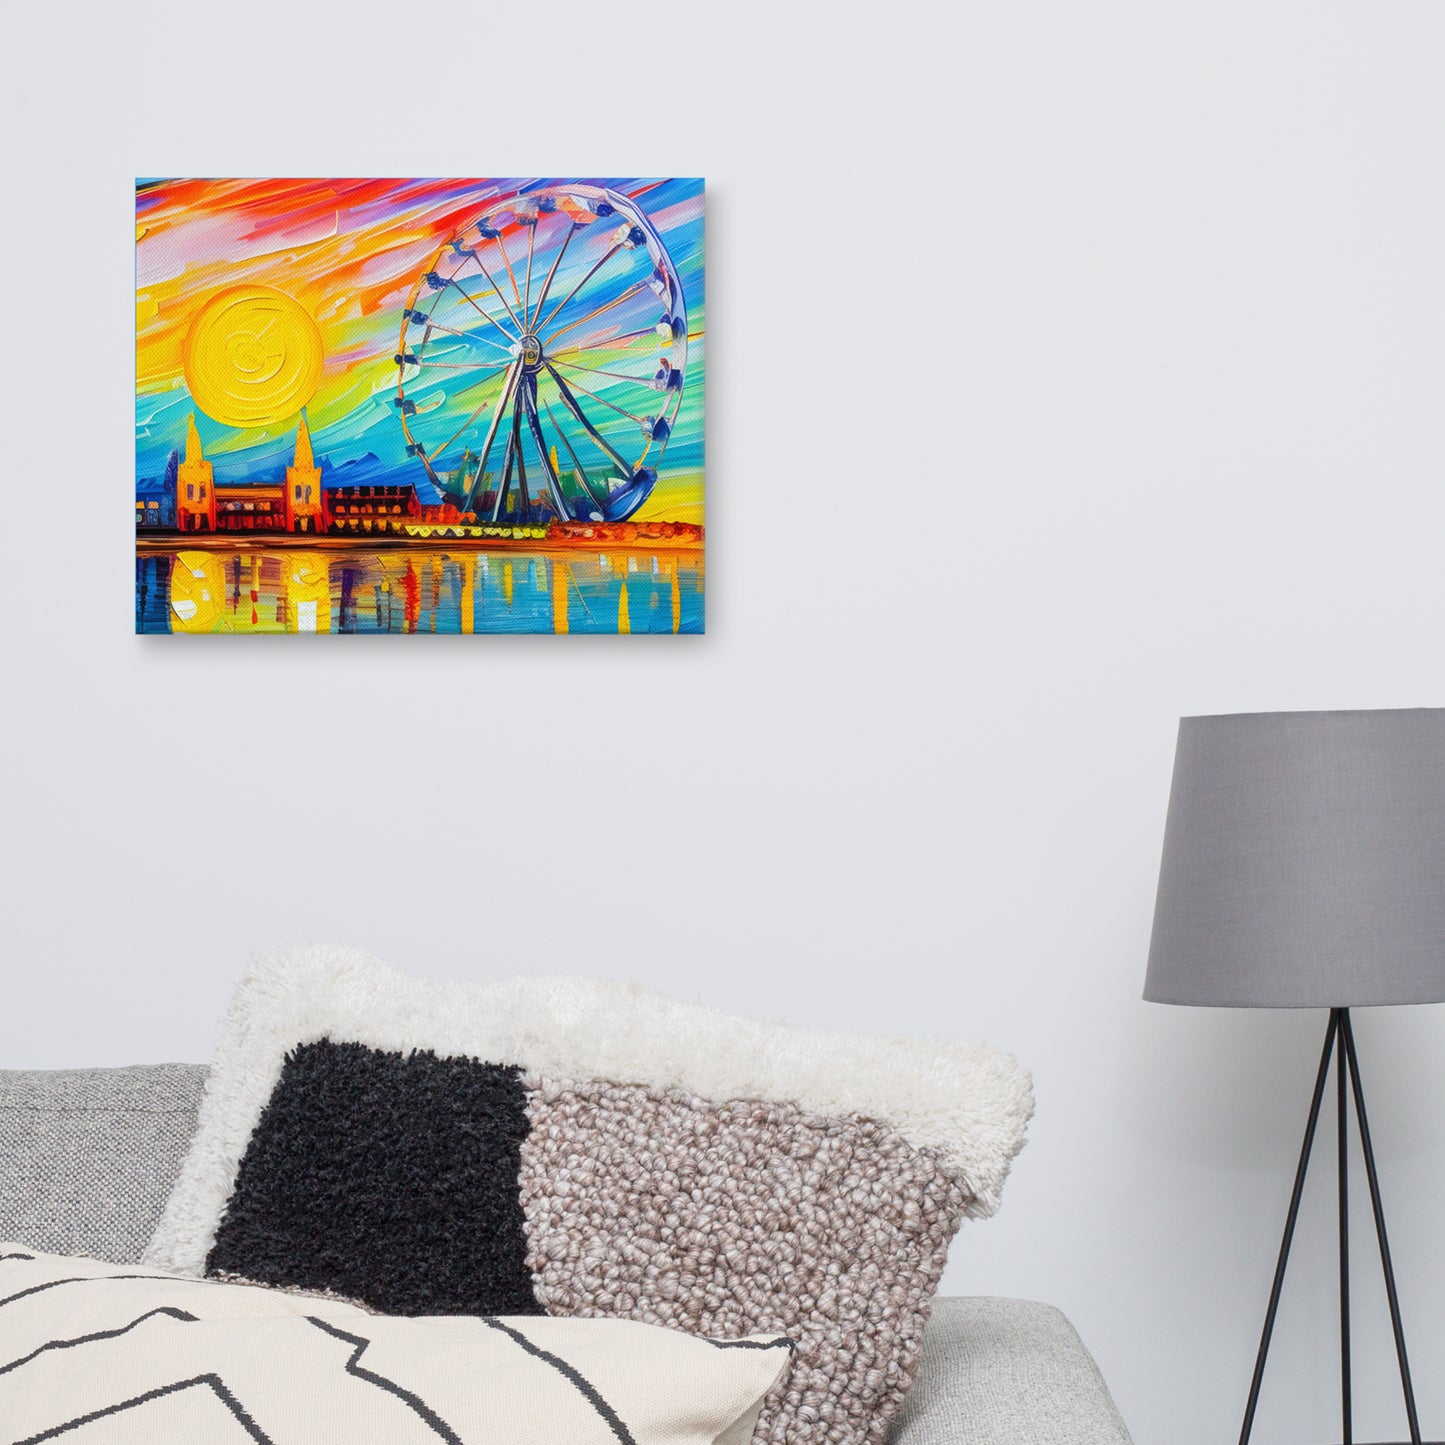  Artistic canvas print showcasing Vienna's famous Prater Ferris wheel, an iconic symbol of the city's charm and history | Seepu